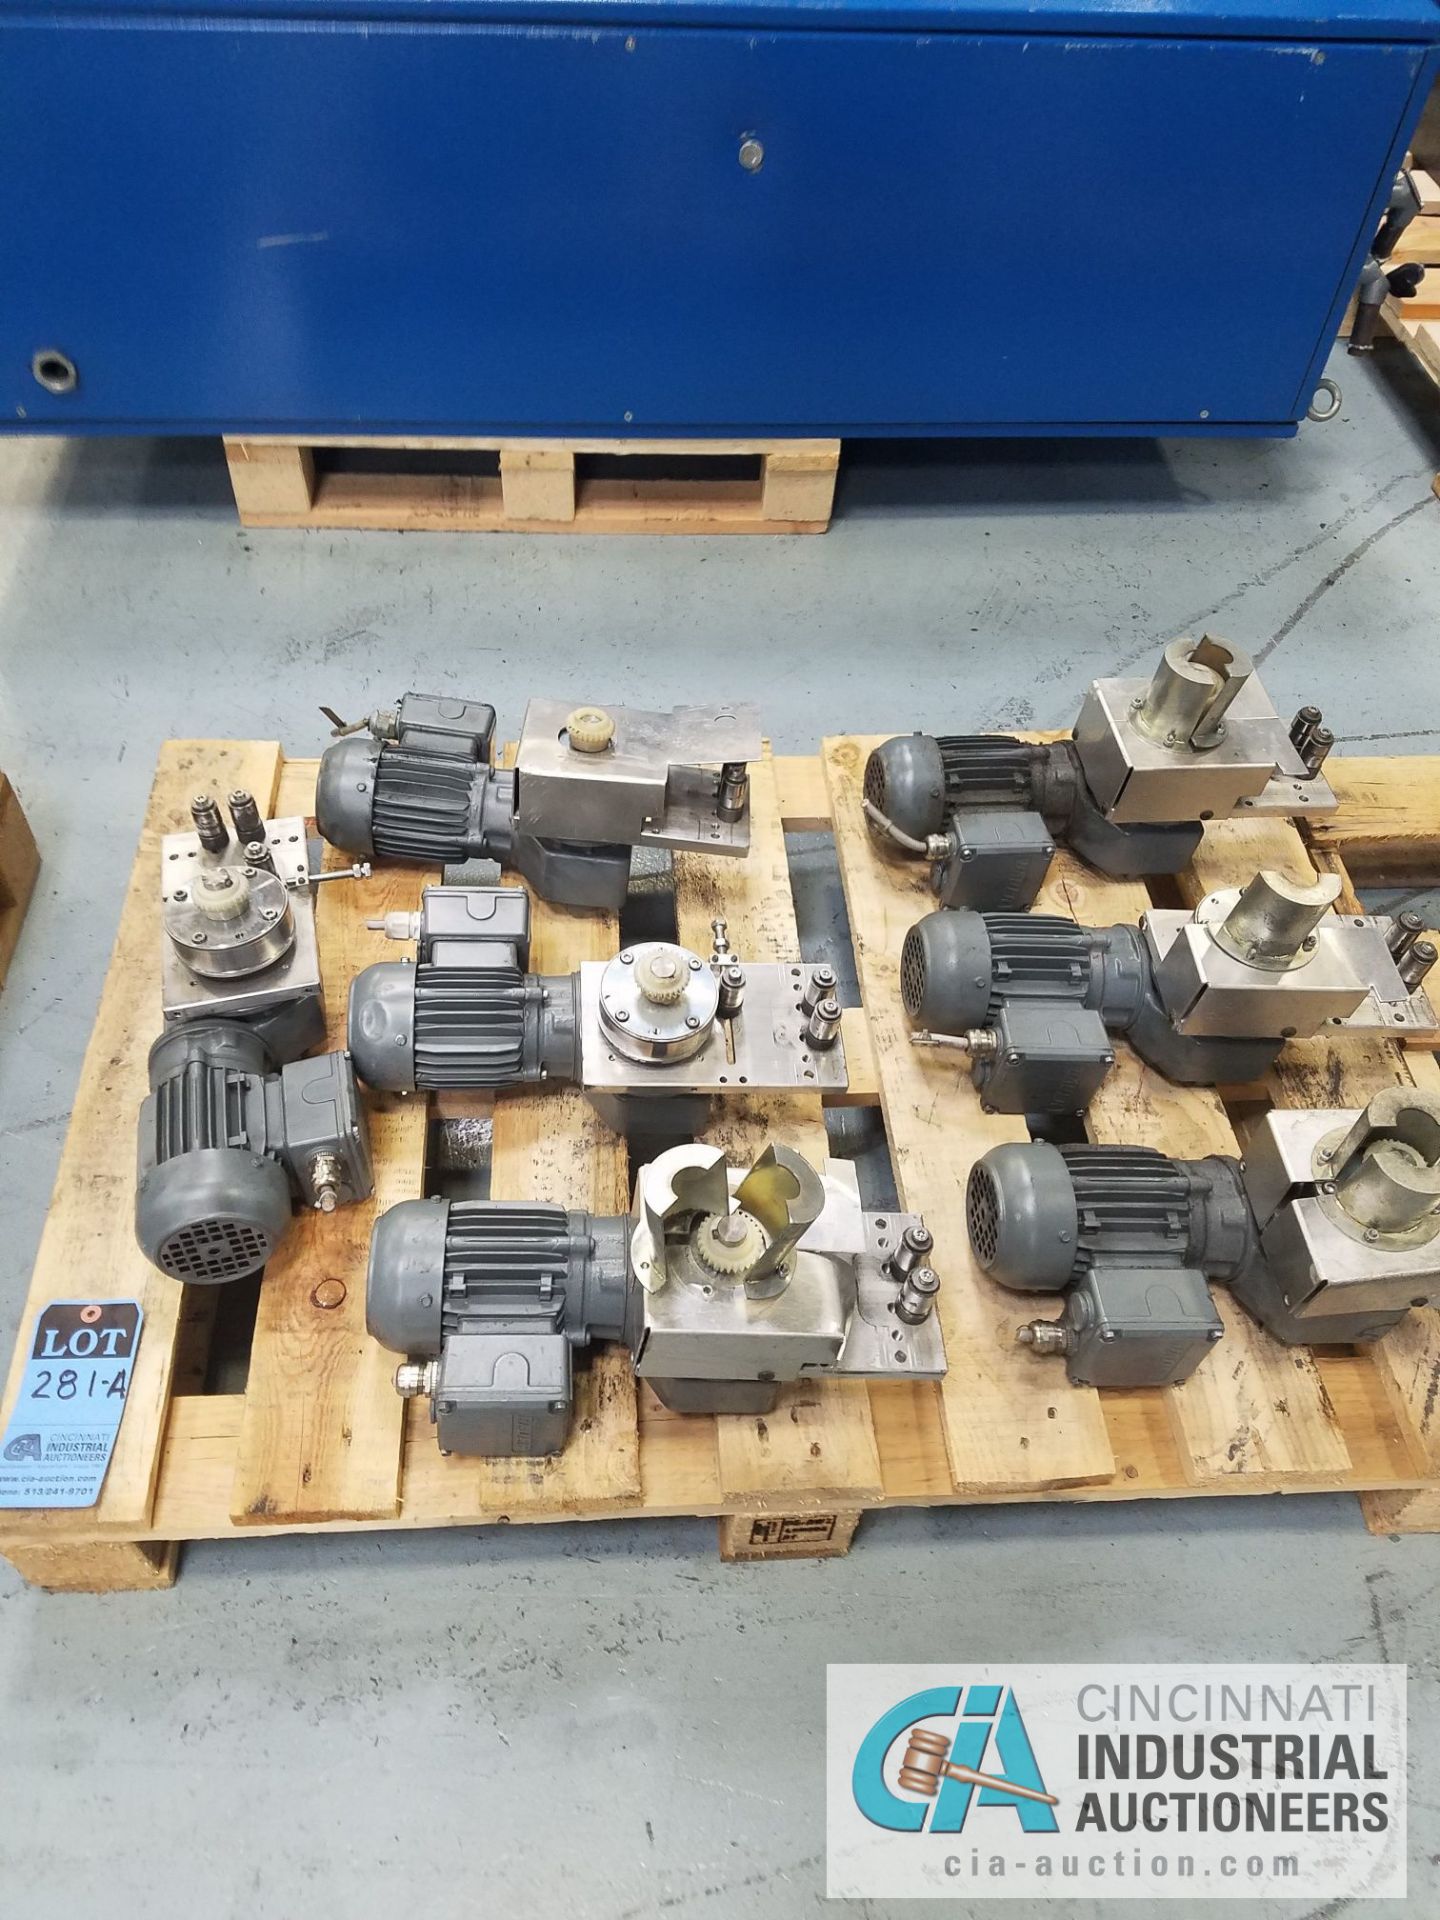 0.12 HP APPROX. DRIVE MOTORS *$25.00 RIGGING FEE DUE TO INDUSTRIAL SERVICES AND SALES*